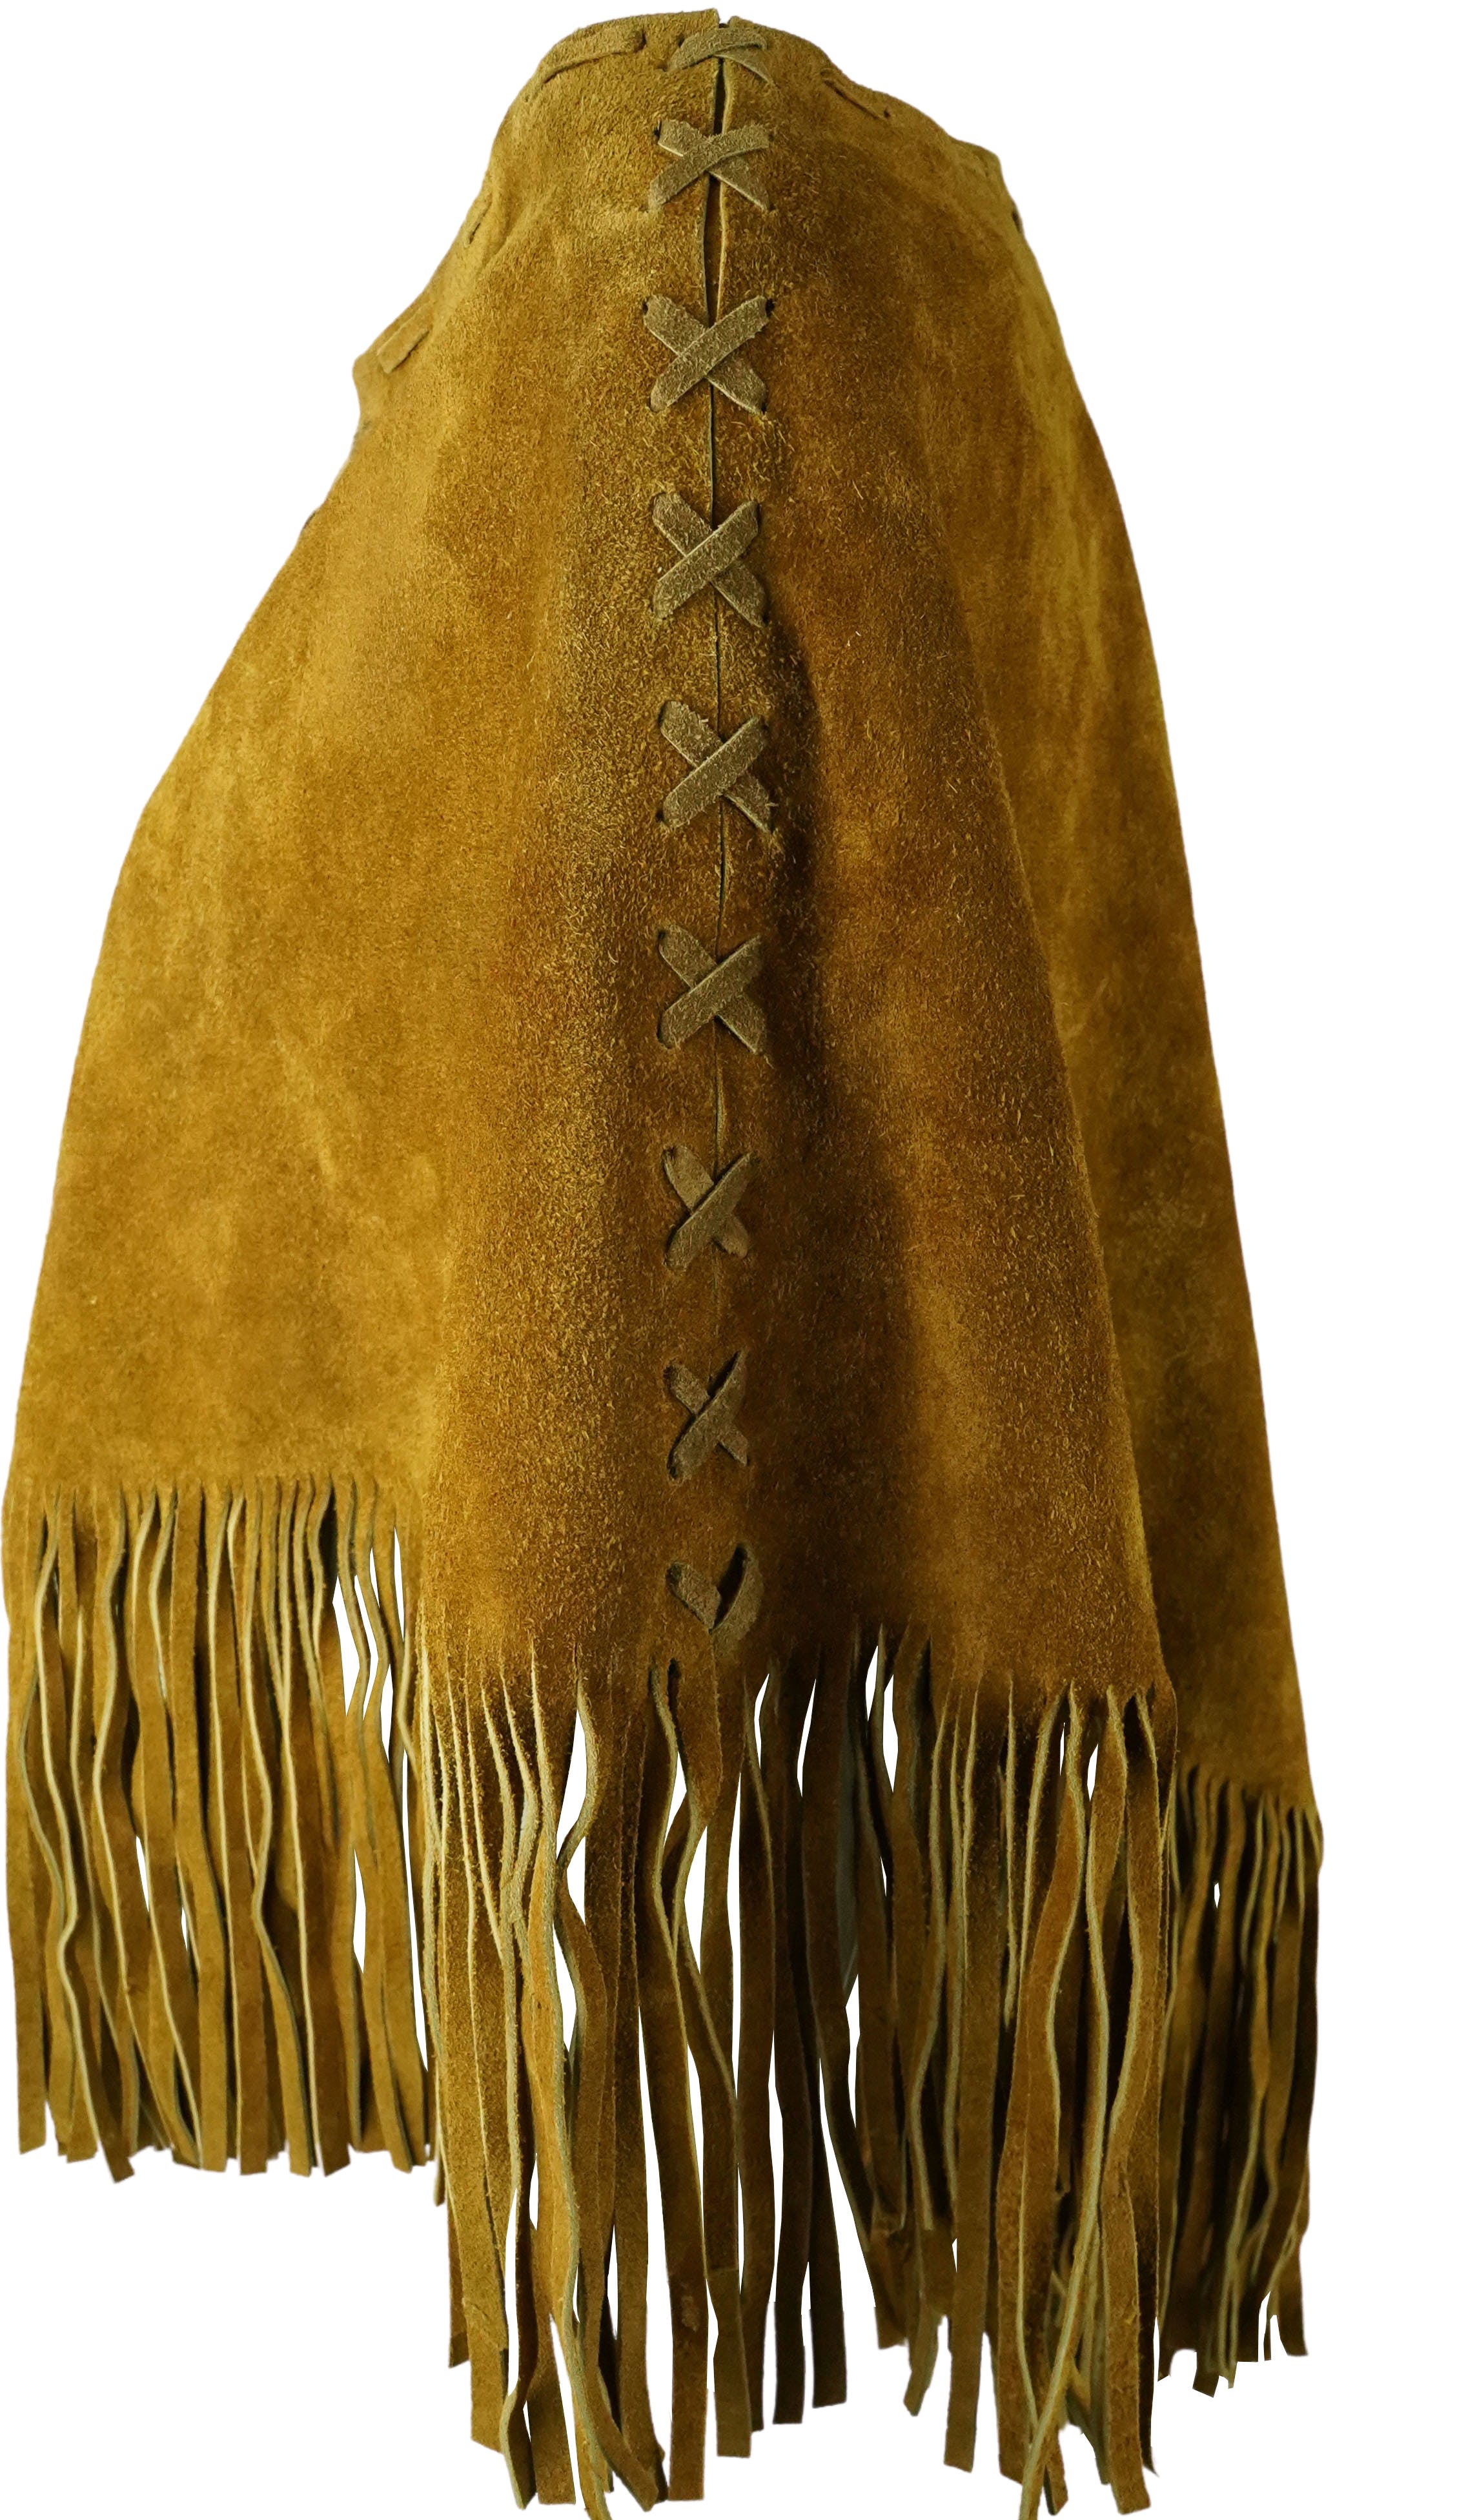 Vintage 70's Suede Poncho with Studs and Fringe - Free Shipping - Thrilling